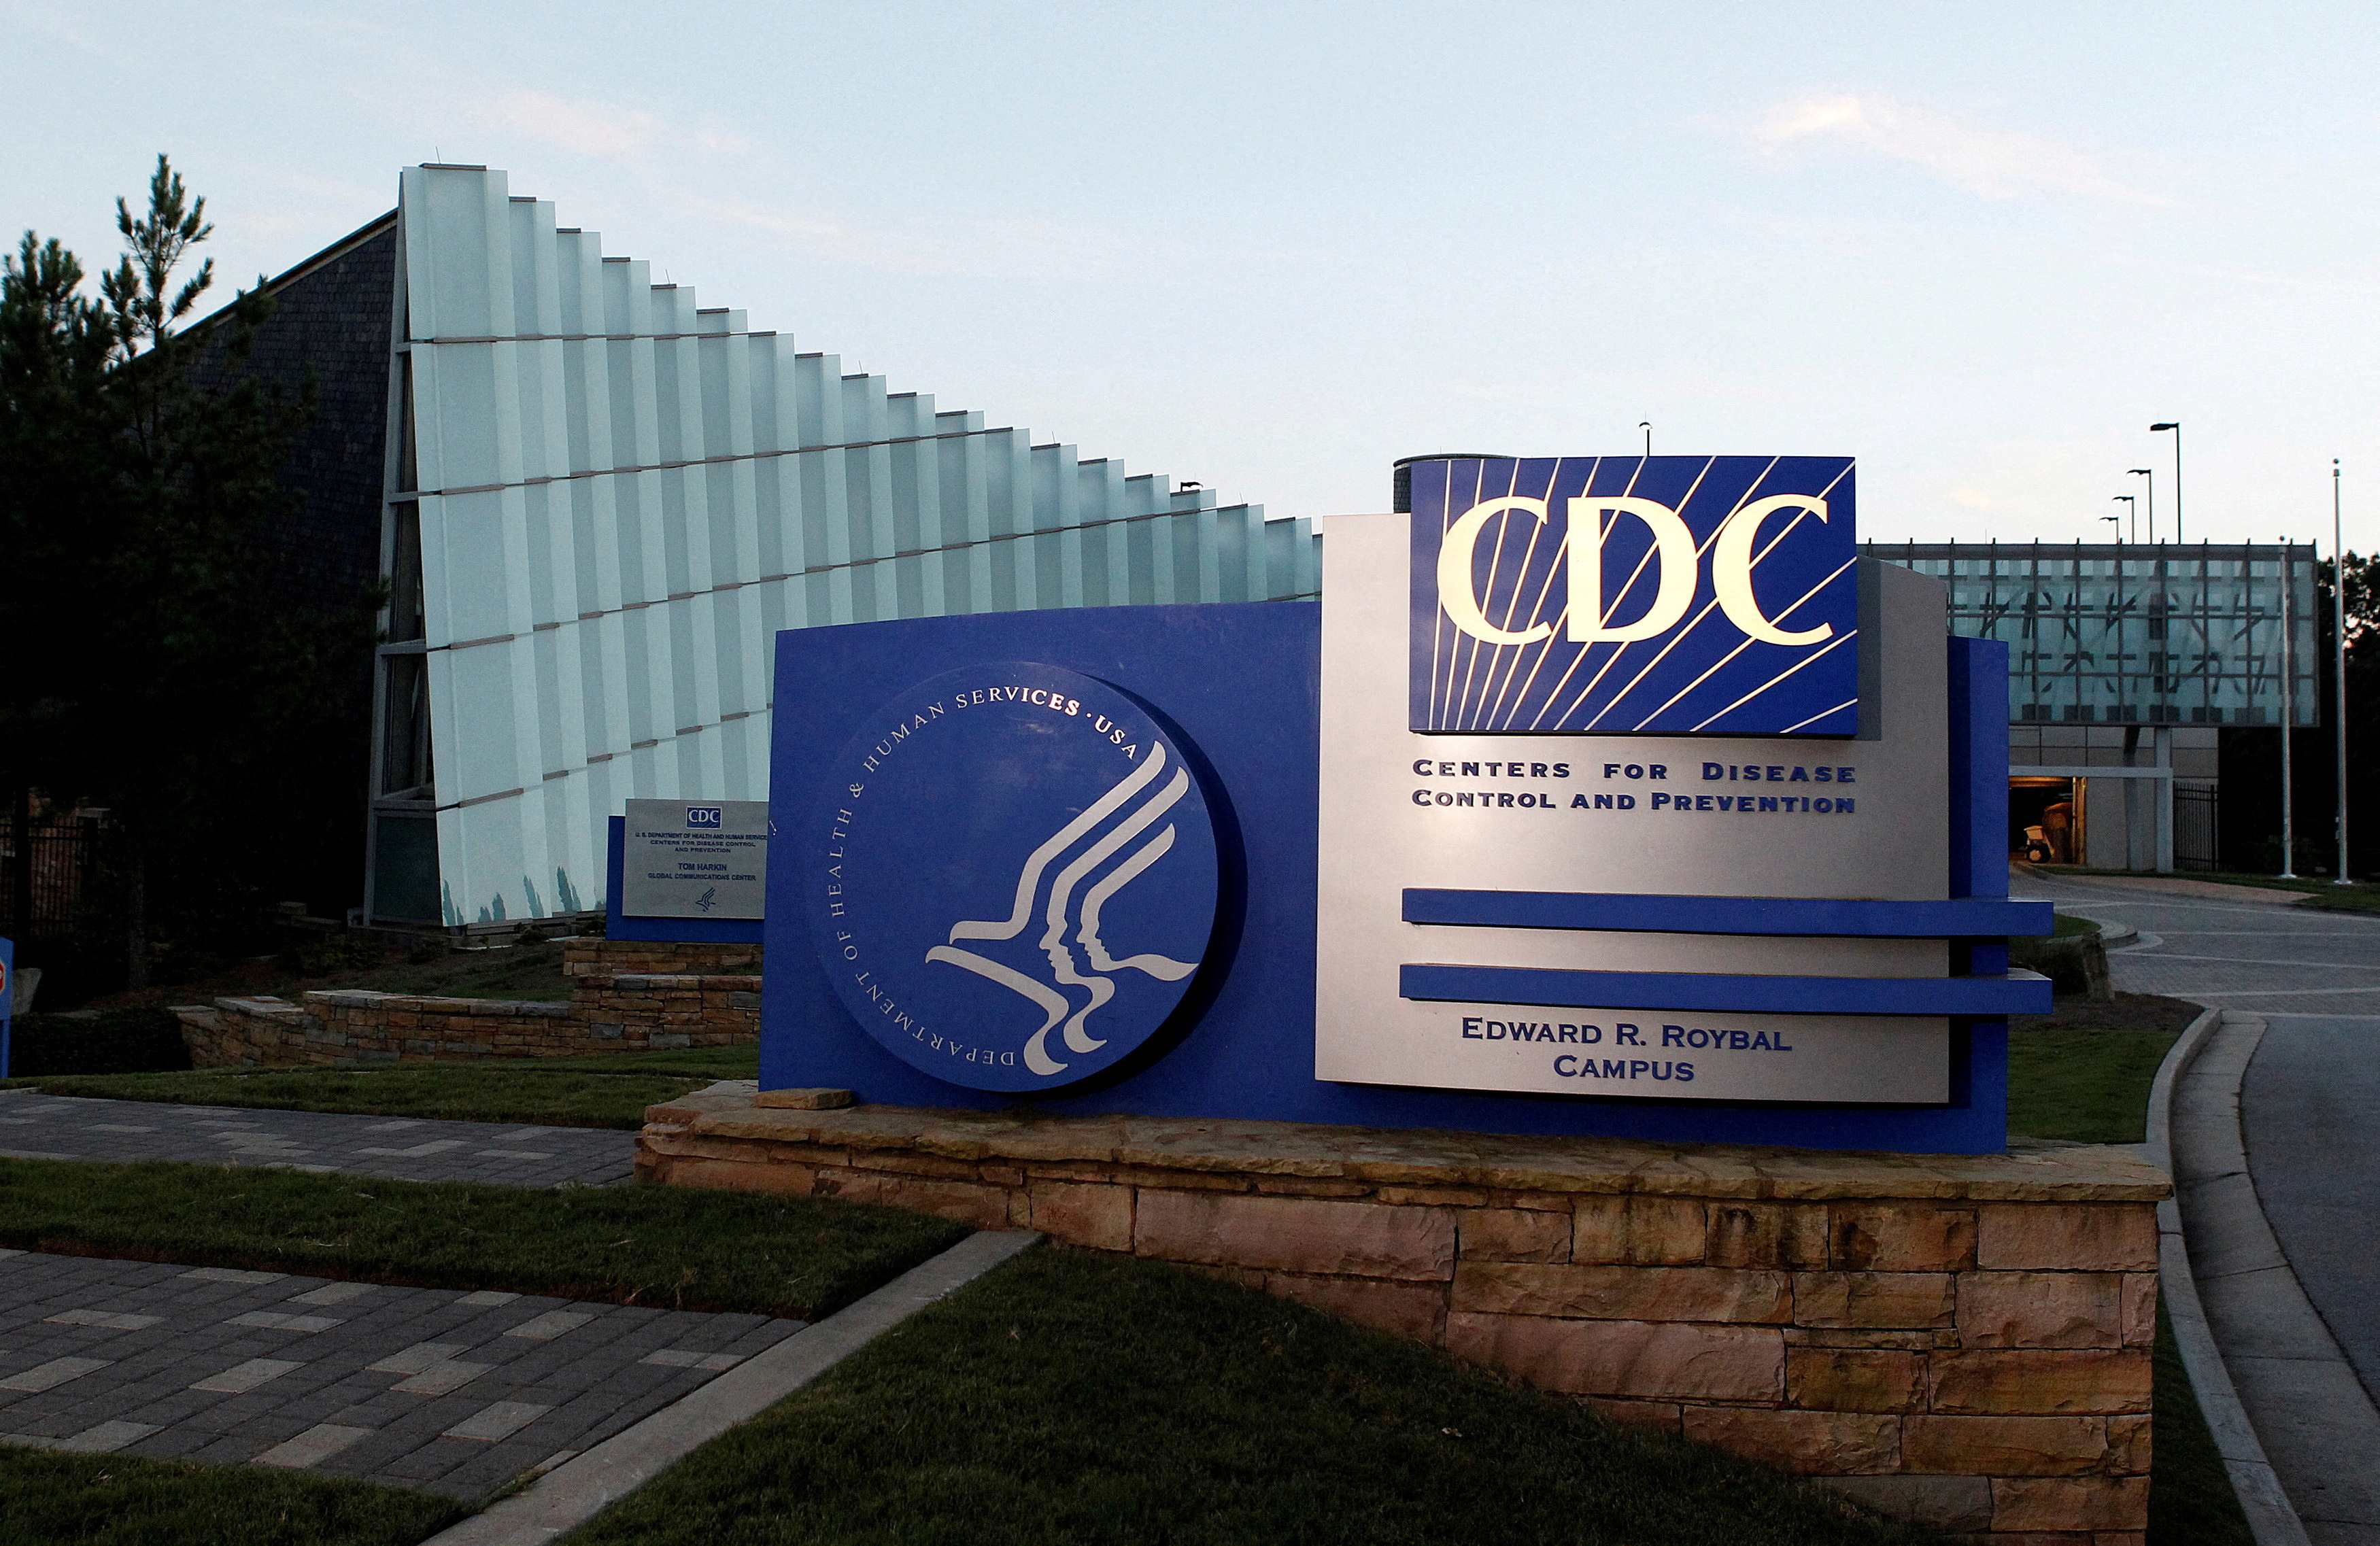 A general view of Centers for Disease Control and Prevention (CDC) headquarters in Atlanta